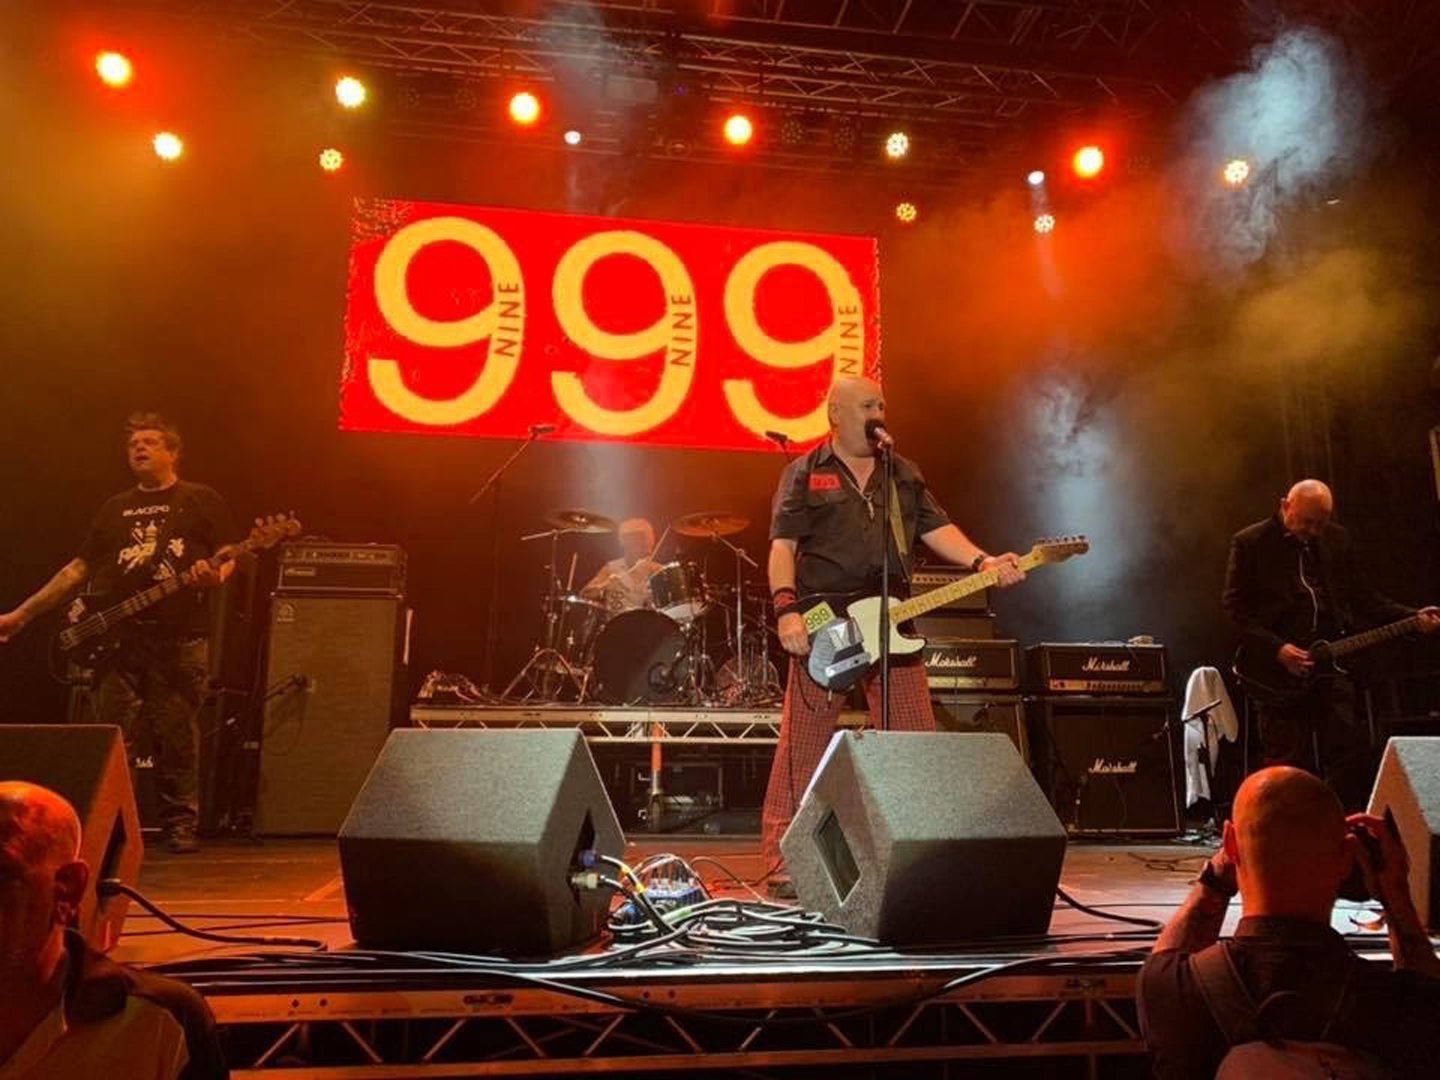 999, who are set to play an Aberdeen gig